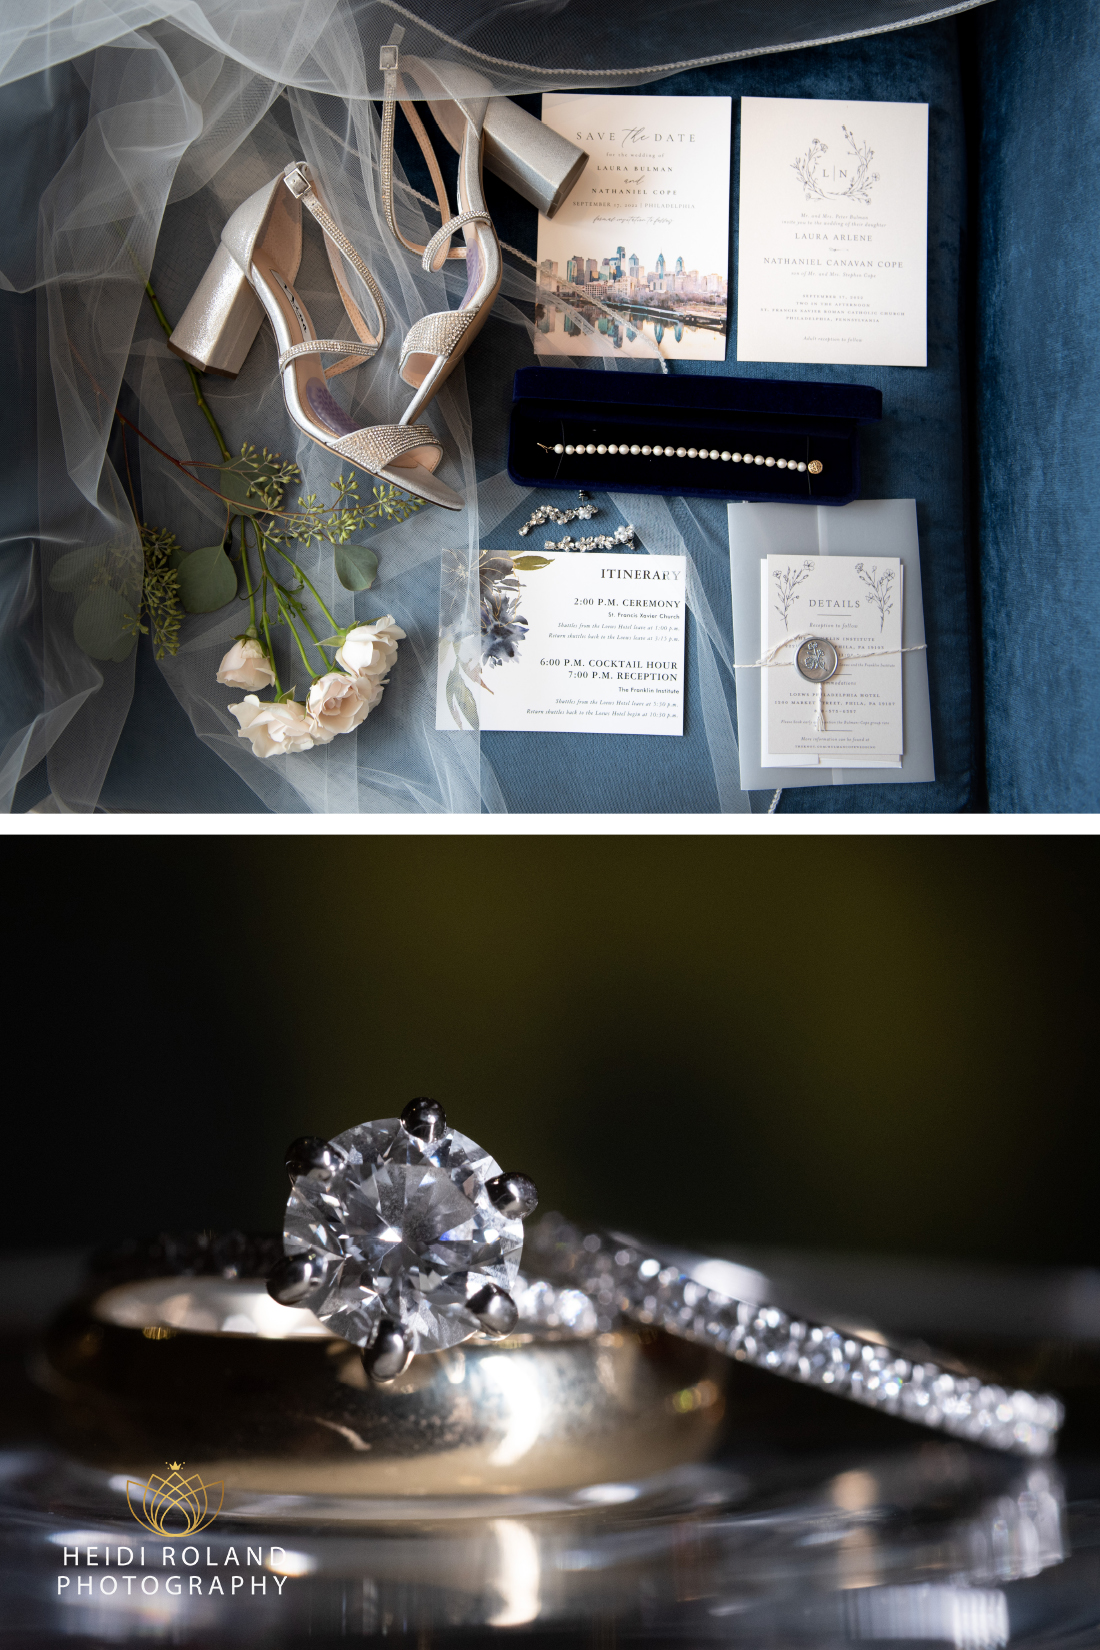 Philadelphia wedding day details including invitations, flowers and wedding rings